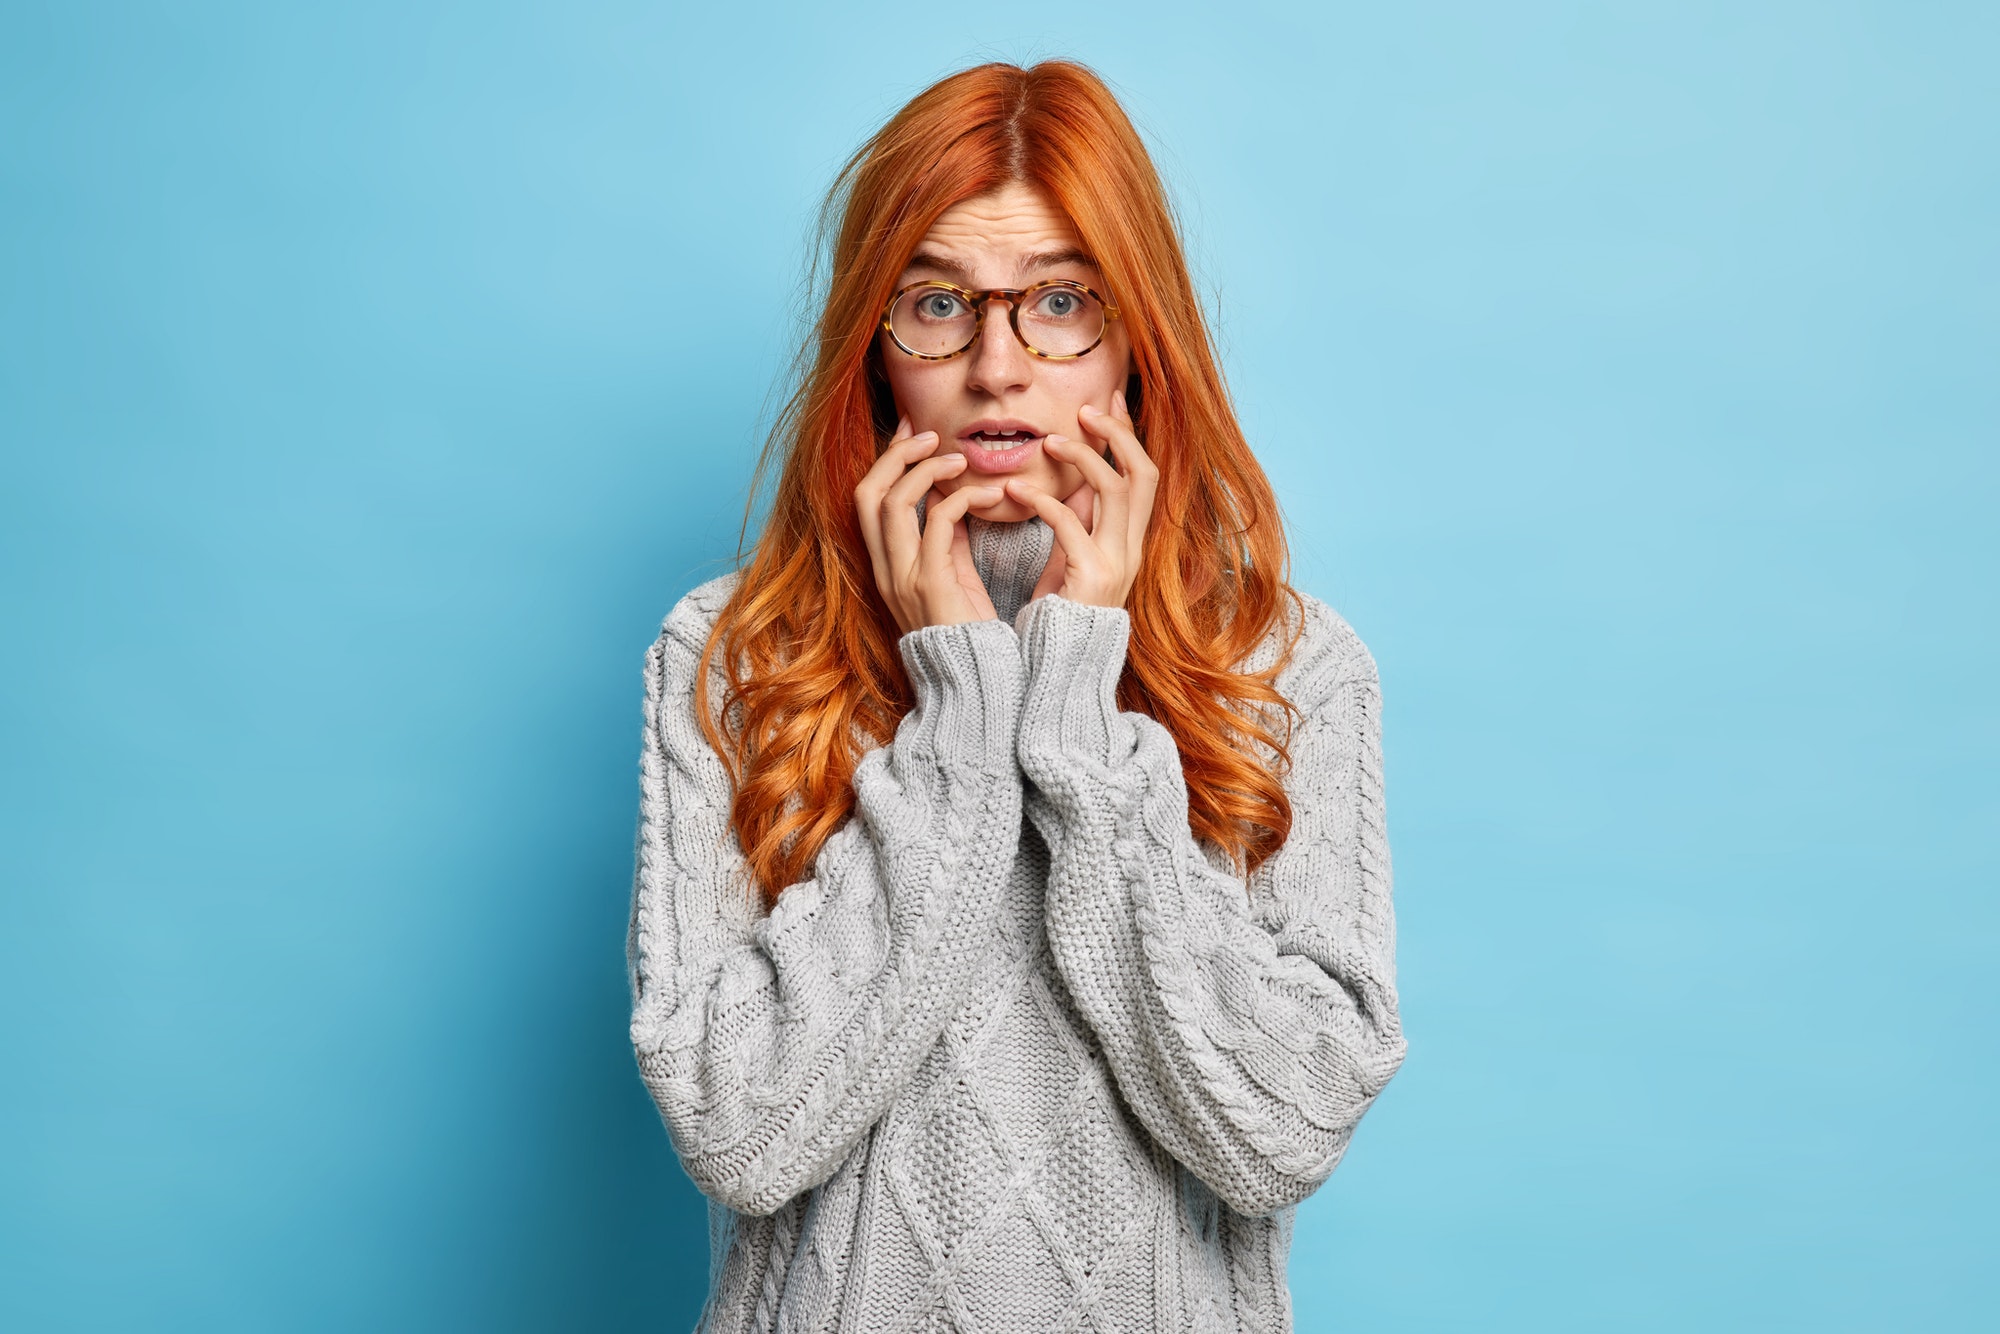 Puzzled nervous woman with long red hair keeps hands on face looks with worried expression at camera